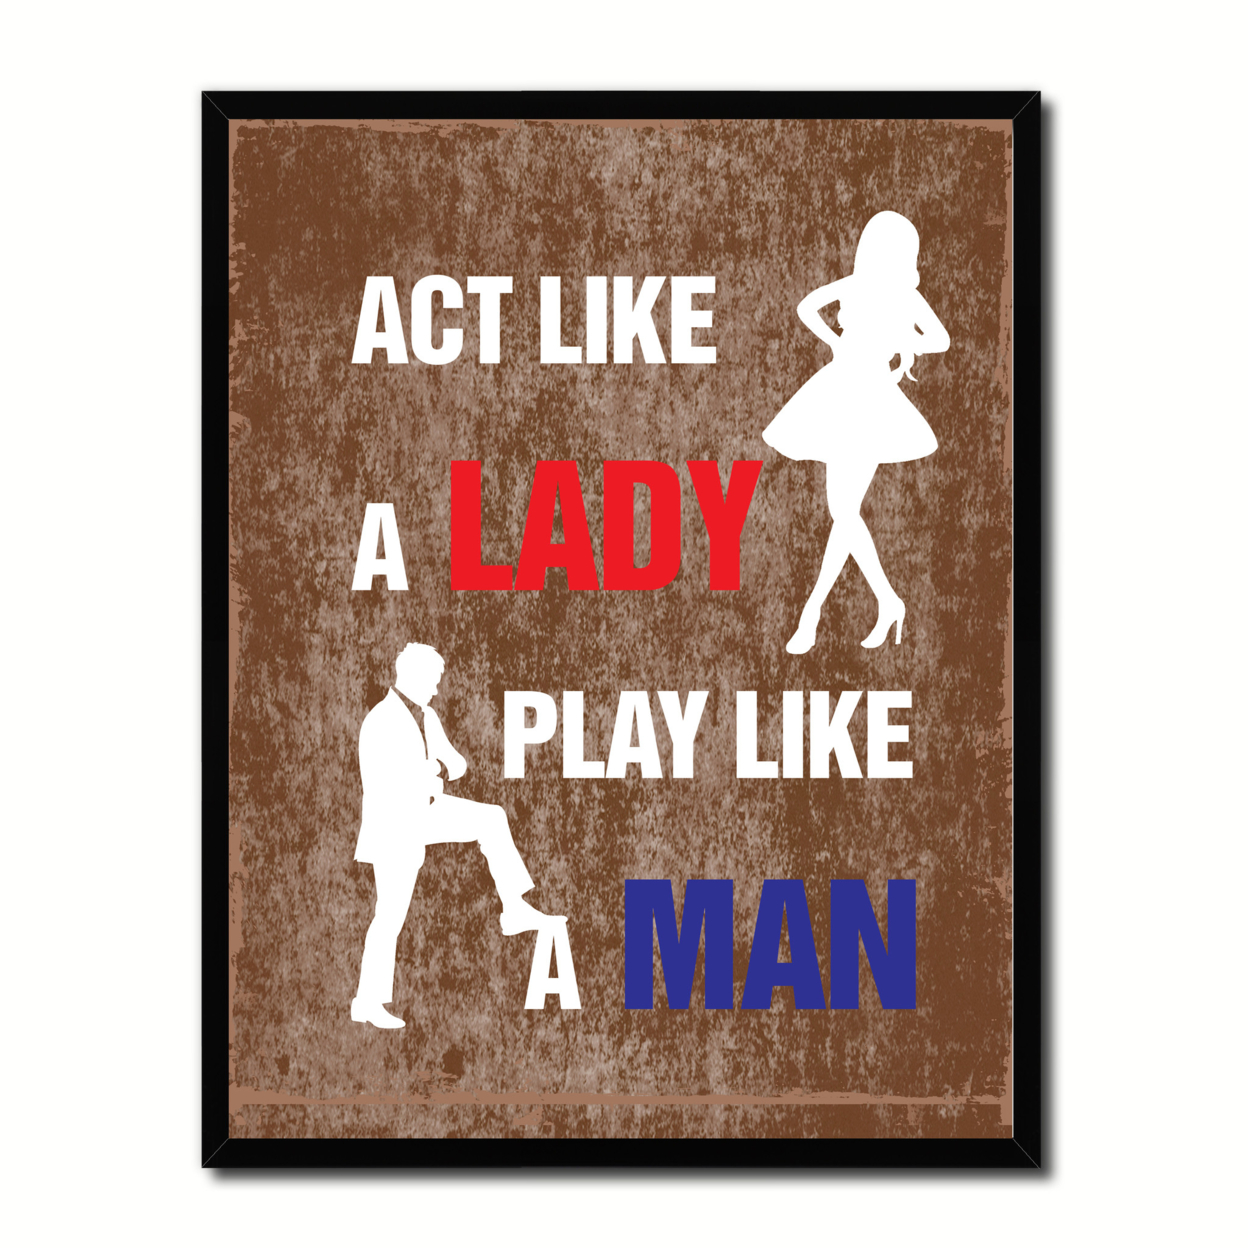 Act Like A Lady Play Like A Man Funny Typo Sign 17007 Picture Frame Gifts Home Decor Wall Art Canvas Print - 22"x29"